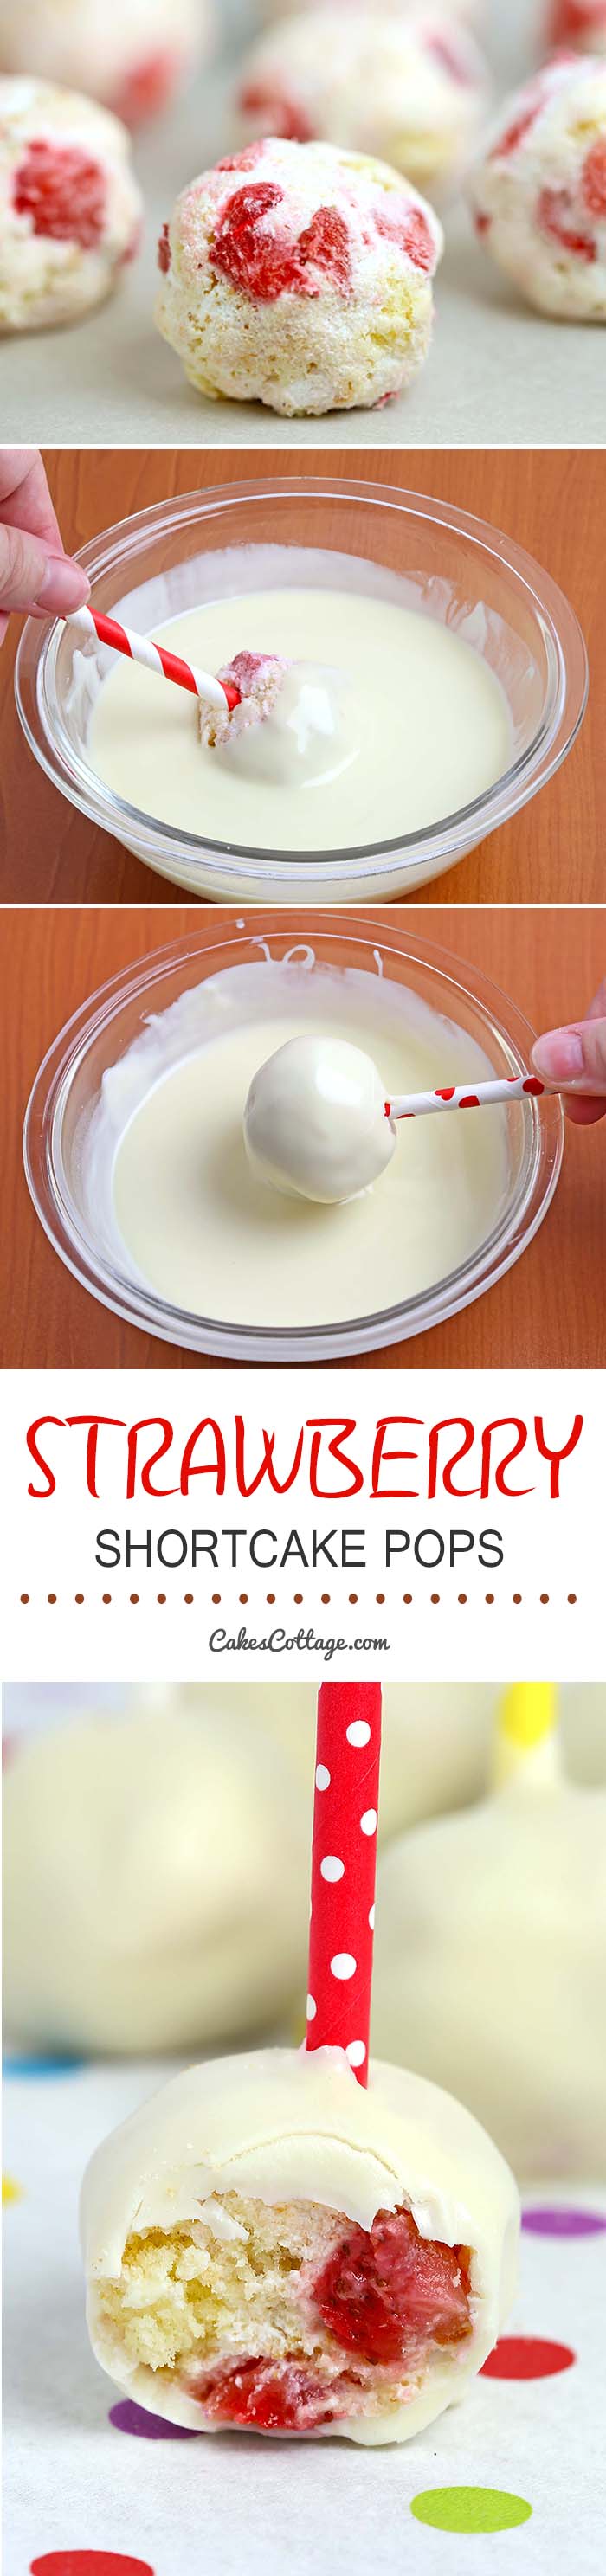 Strawberry shortcake pops - Angel food cake balls stuffed with fresh strawberries and whipped cream then dipped into melted white chocolate.  A simple and fun way to enjoy the classic strawberry shortcake.